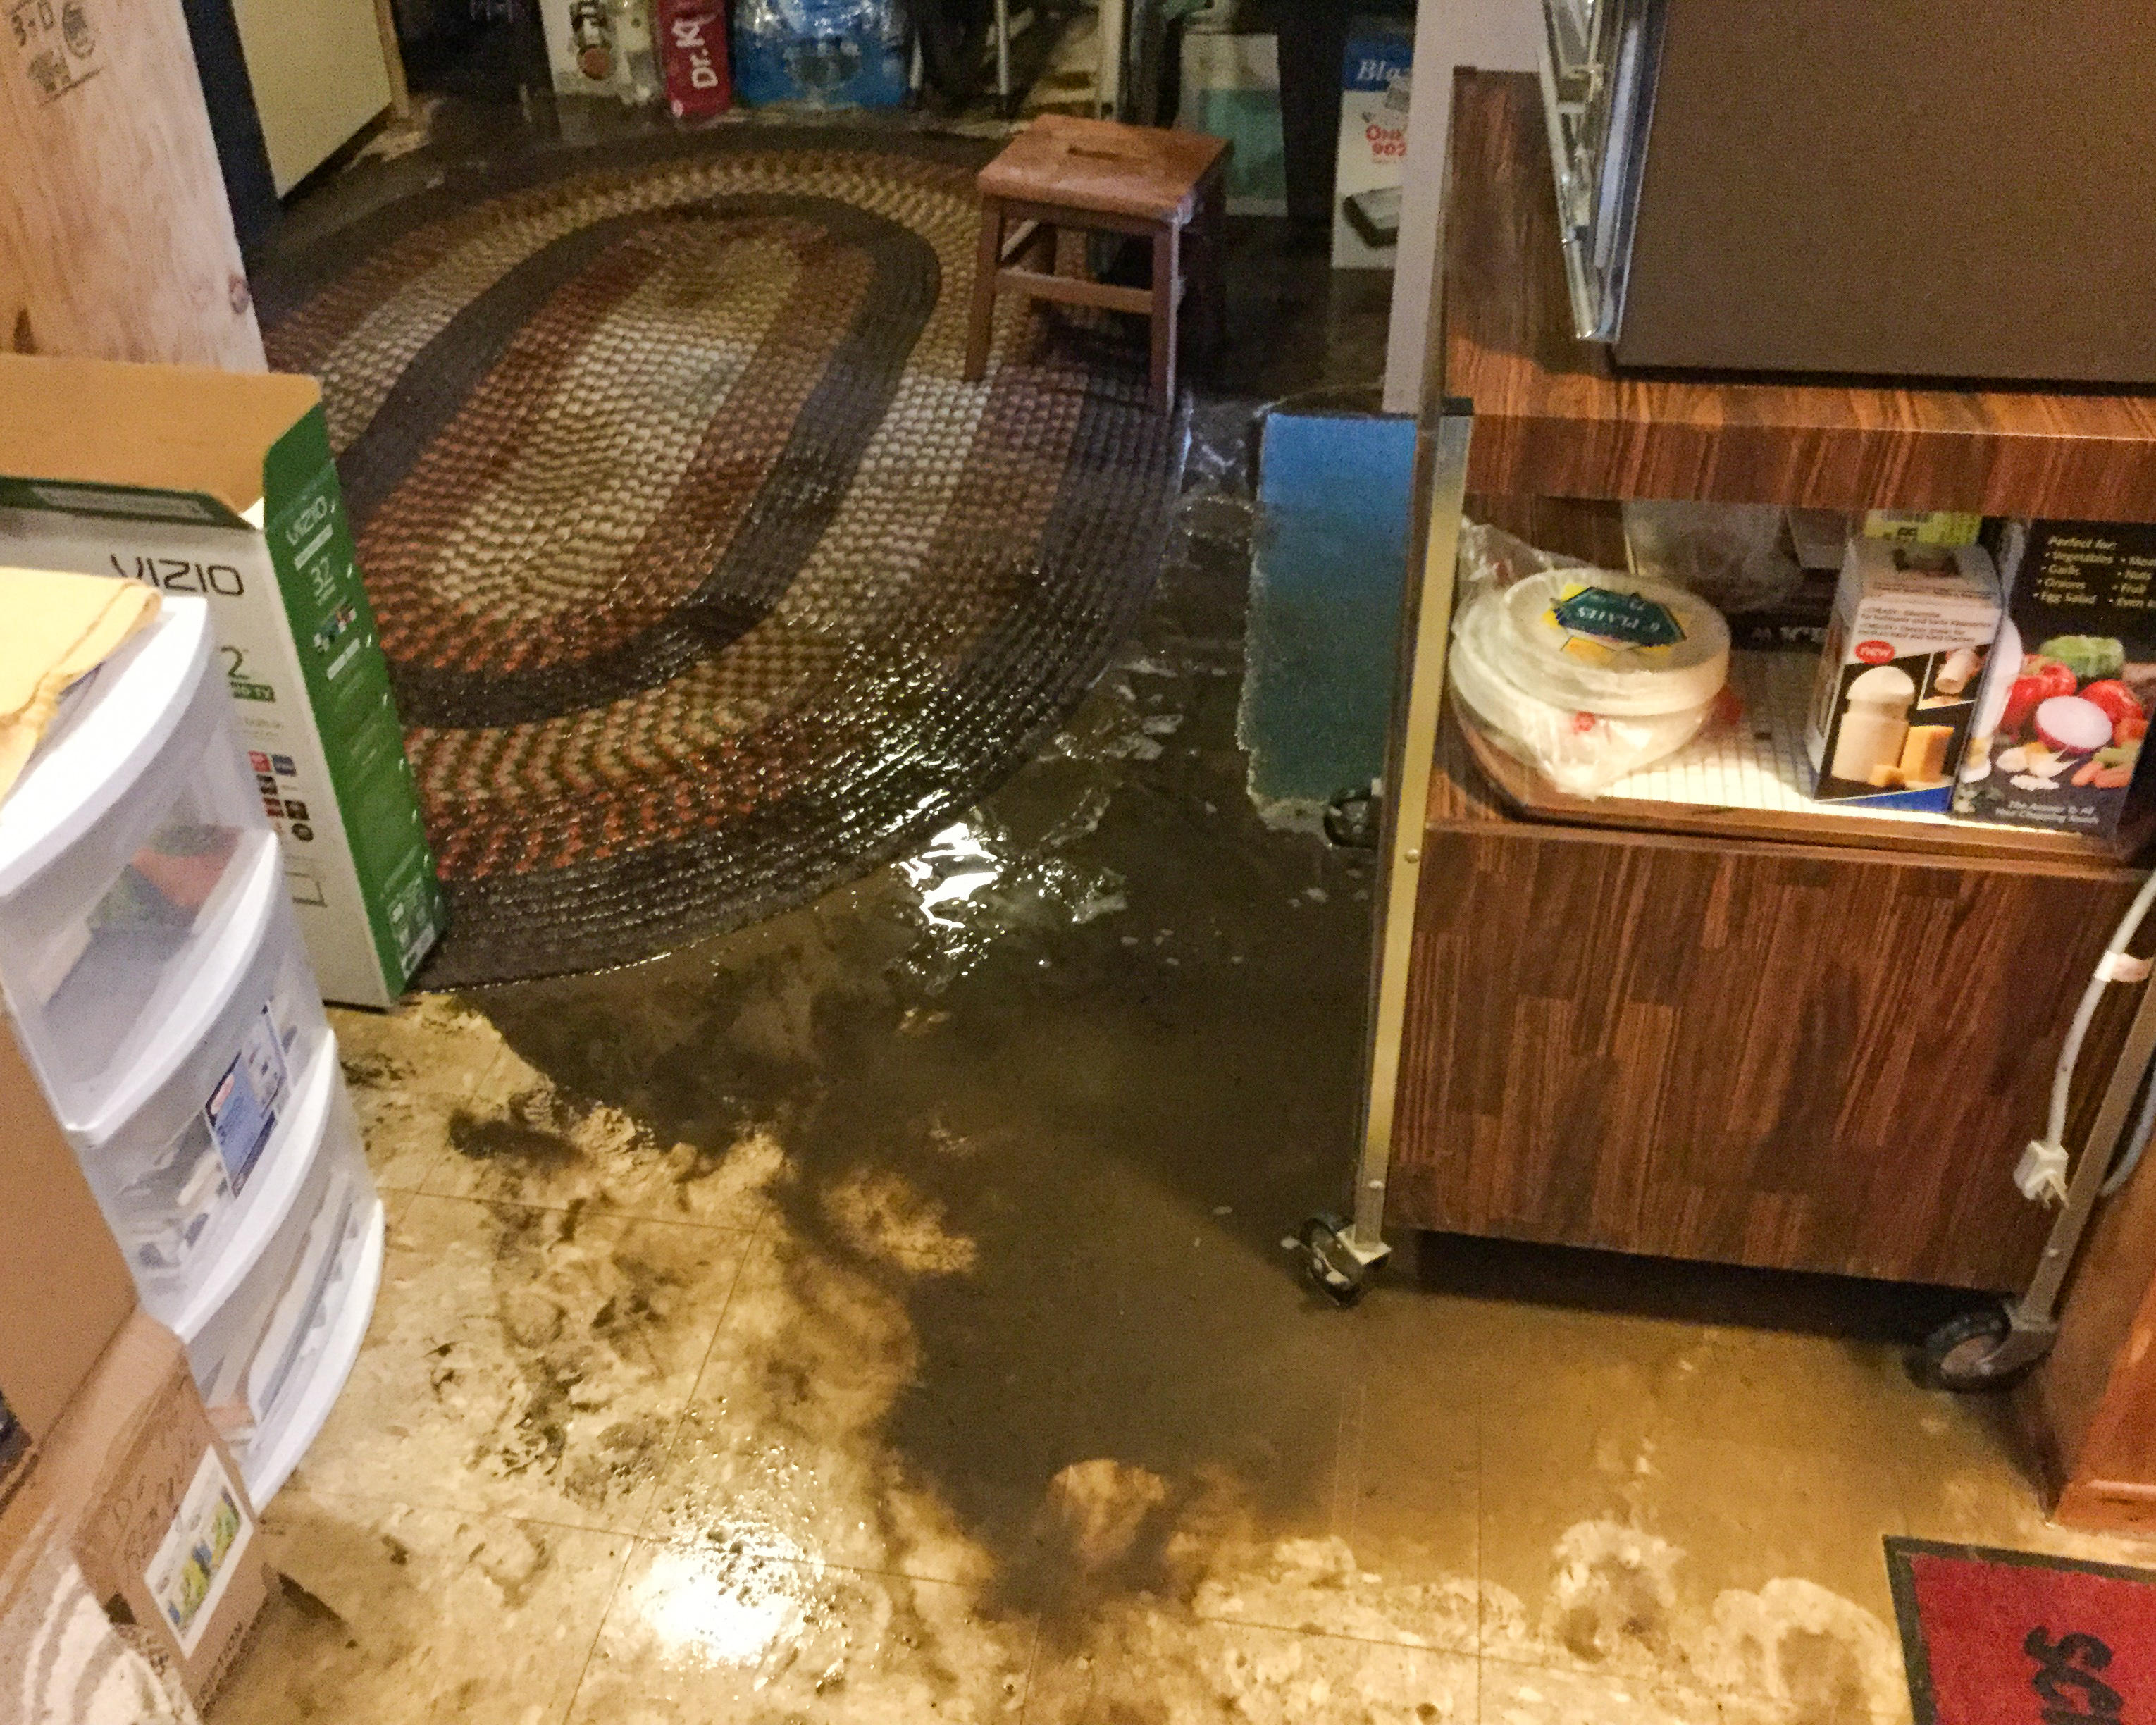 If you have a water event it is important to have a professional extract the water and do the dry-out to minimize damage to your property. Call SERVPRO of Shoreline/Woodinville 24/7, 365 for emergency water restoration services.